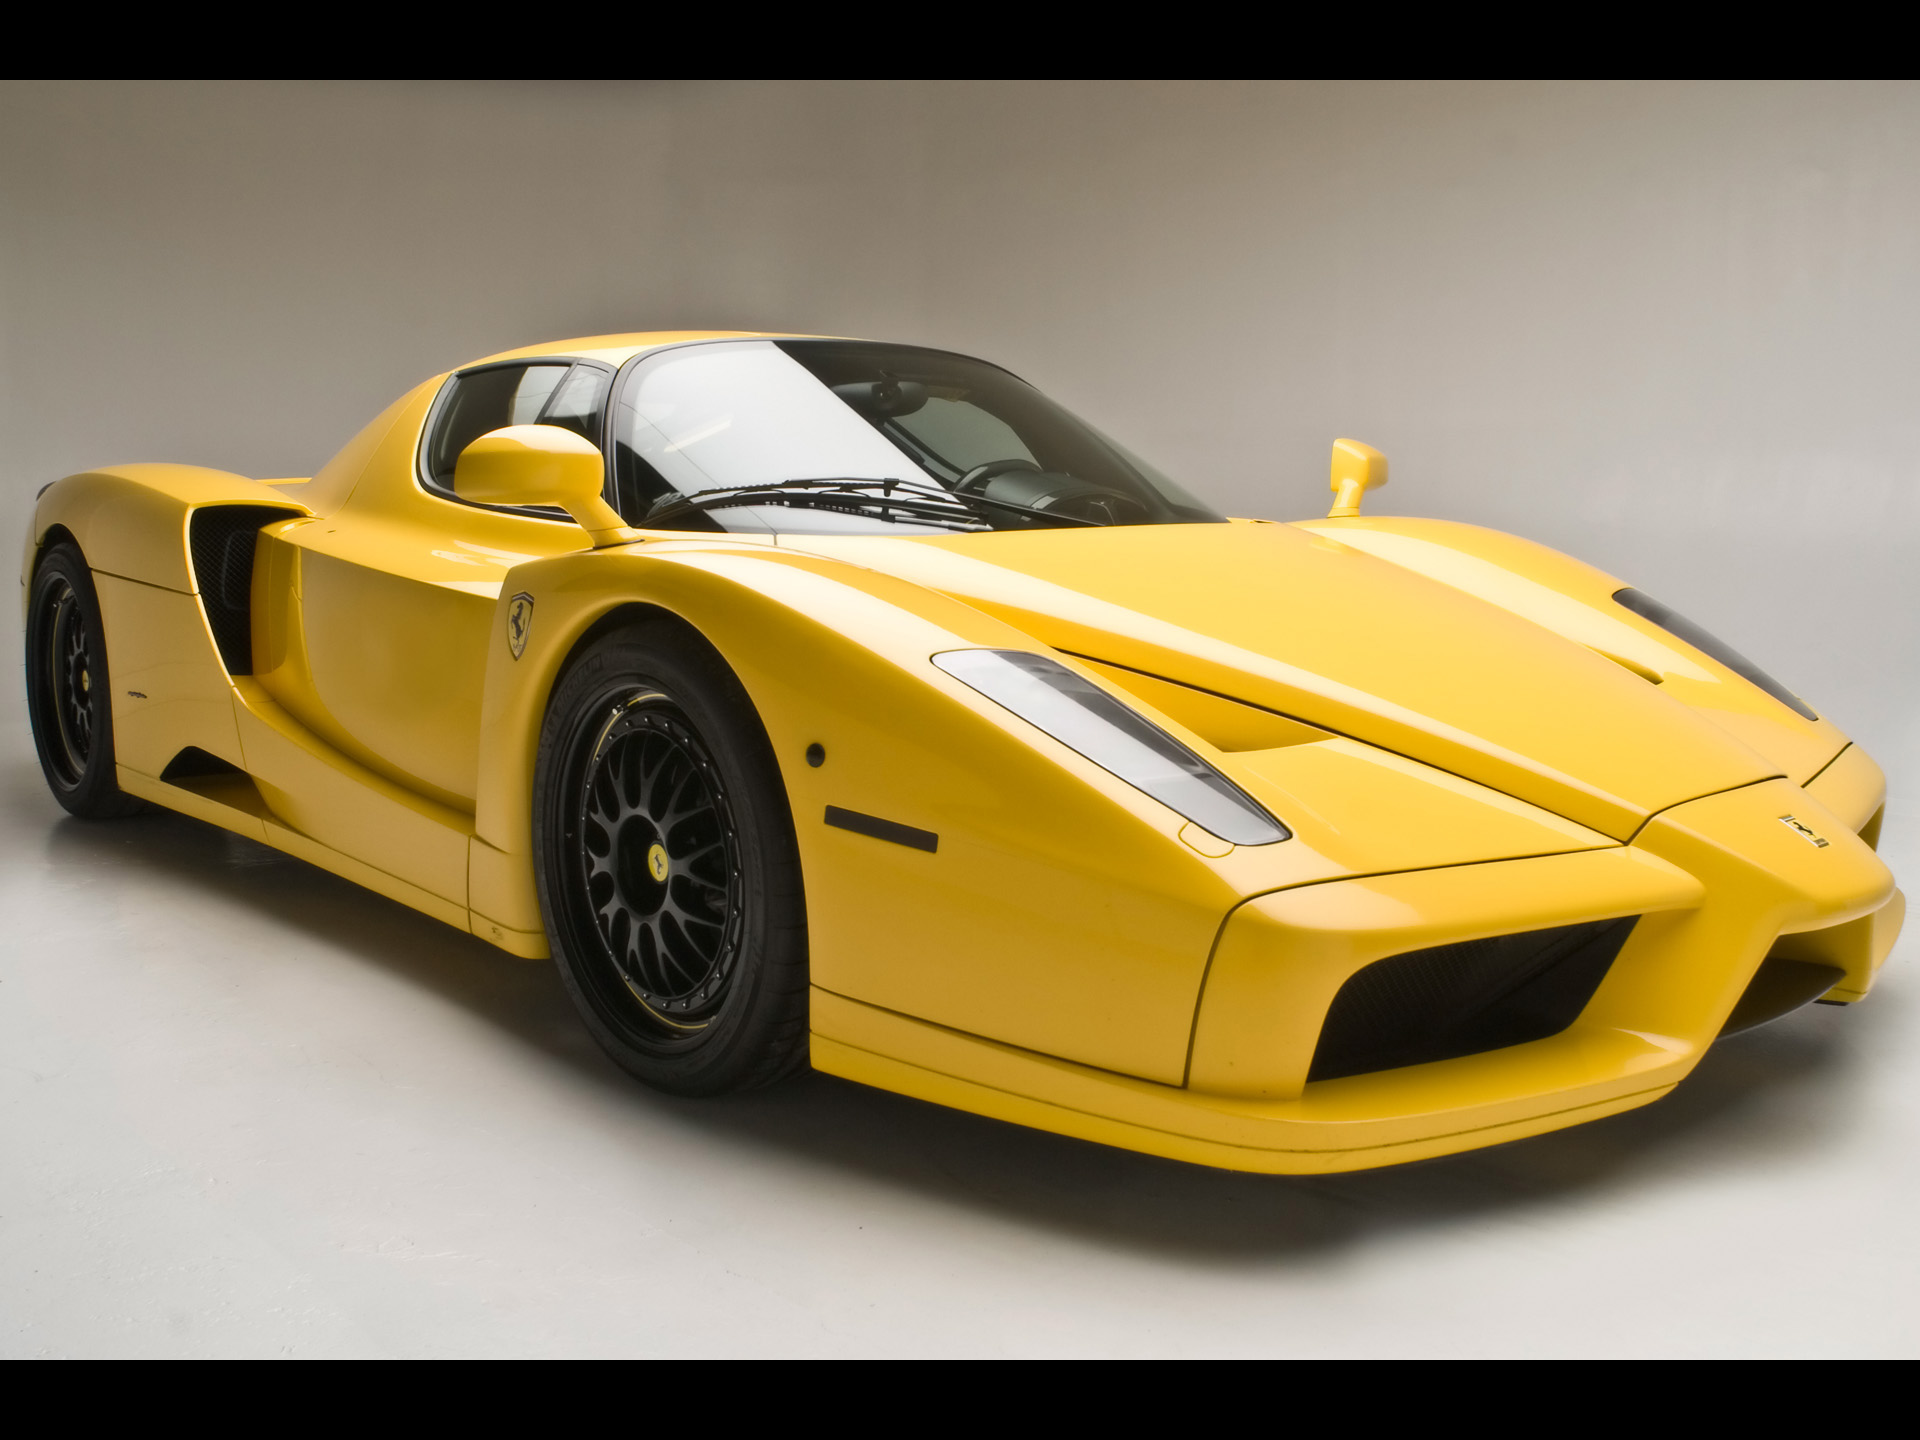 Download full size 2008 Edo Competition Enzo Front And Side Ferrari wallpaper / 1920x1440